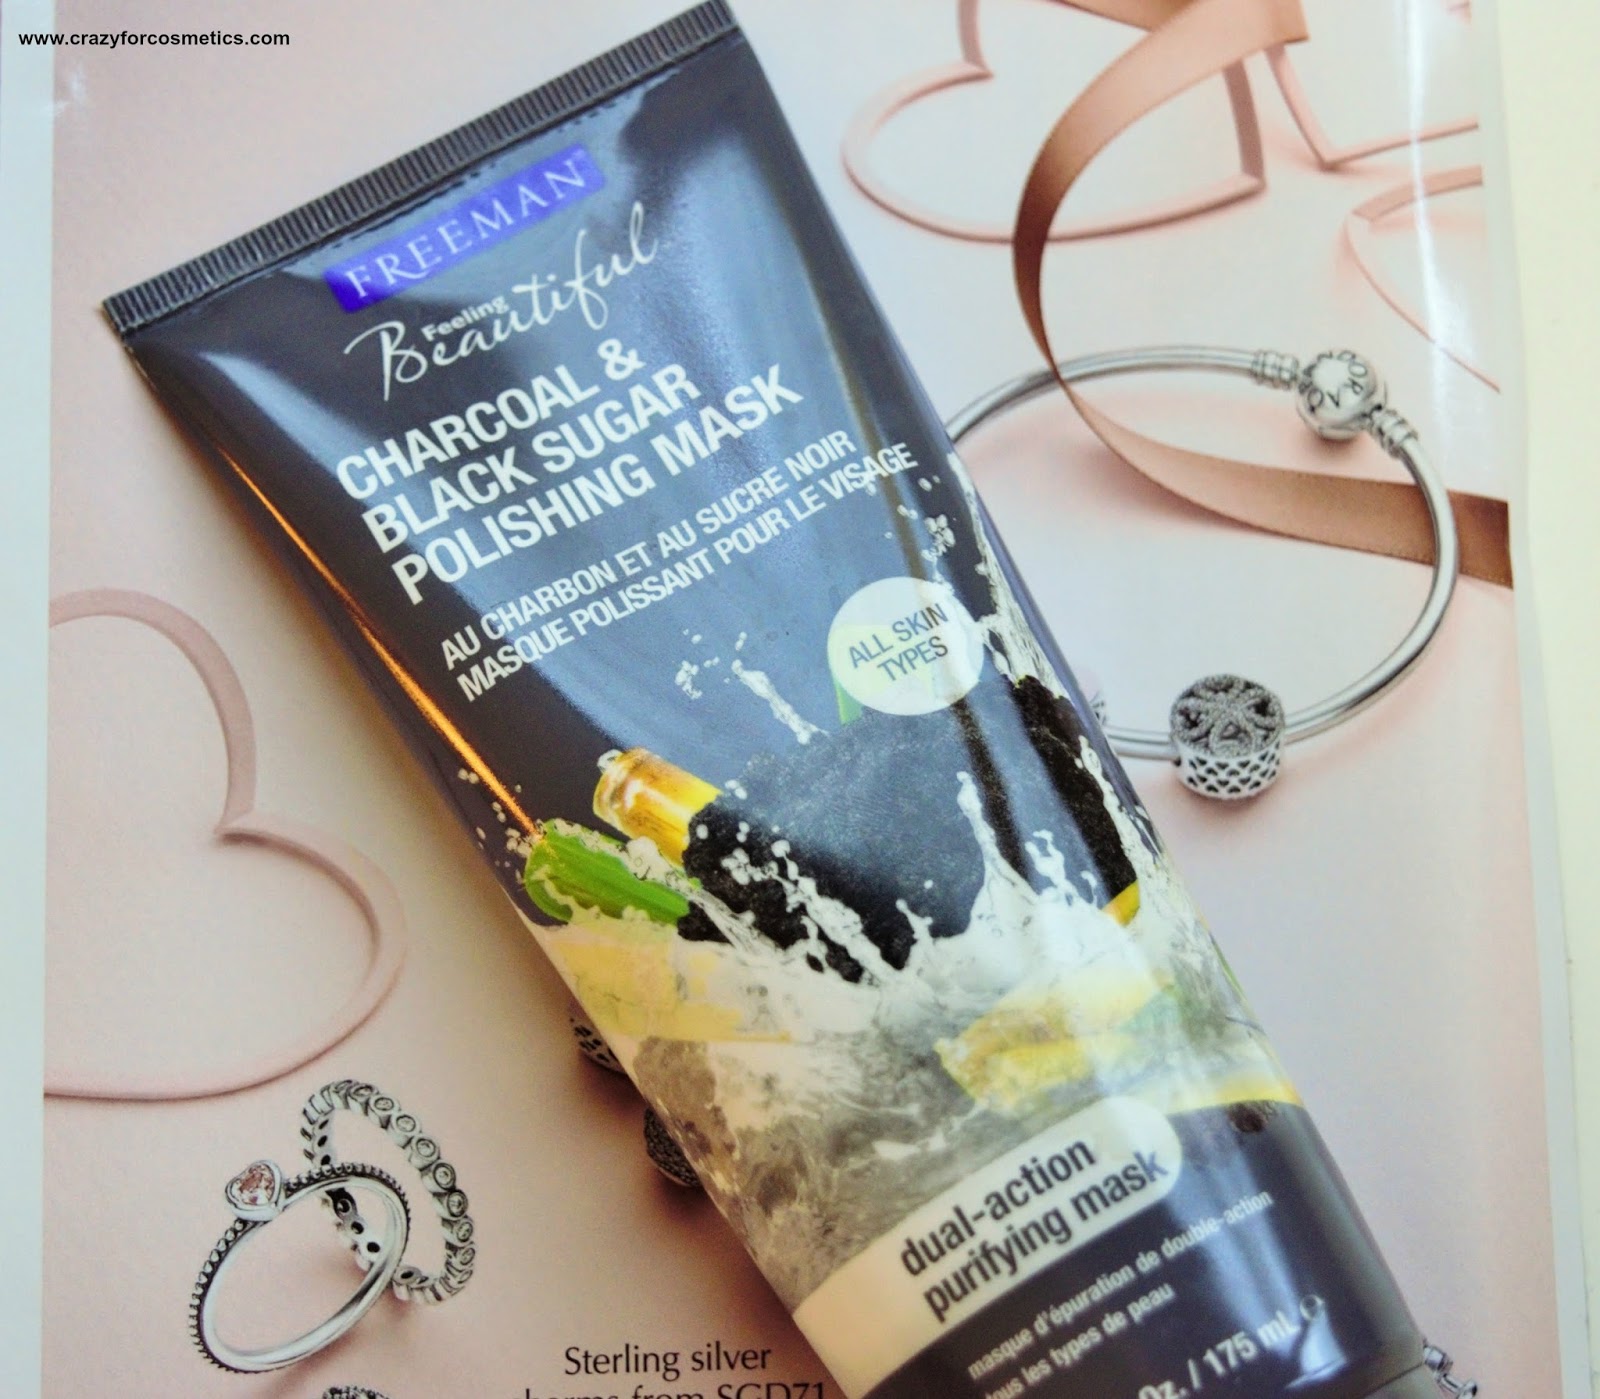 Crazy for Cosmetics- A Singapore Beauty/ Lifestyle blog about Makeup,Lifestyle and Shopping: Freeman Charcoal & Black Sugar Facial Polishing Mask Review